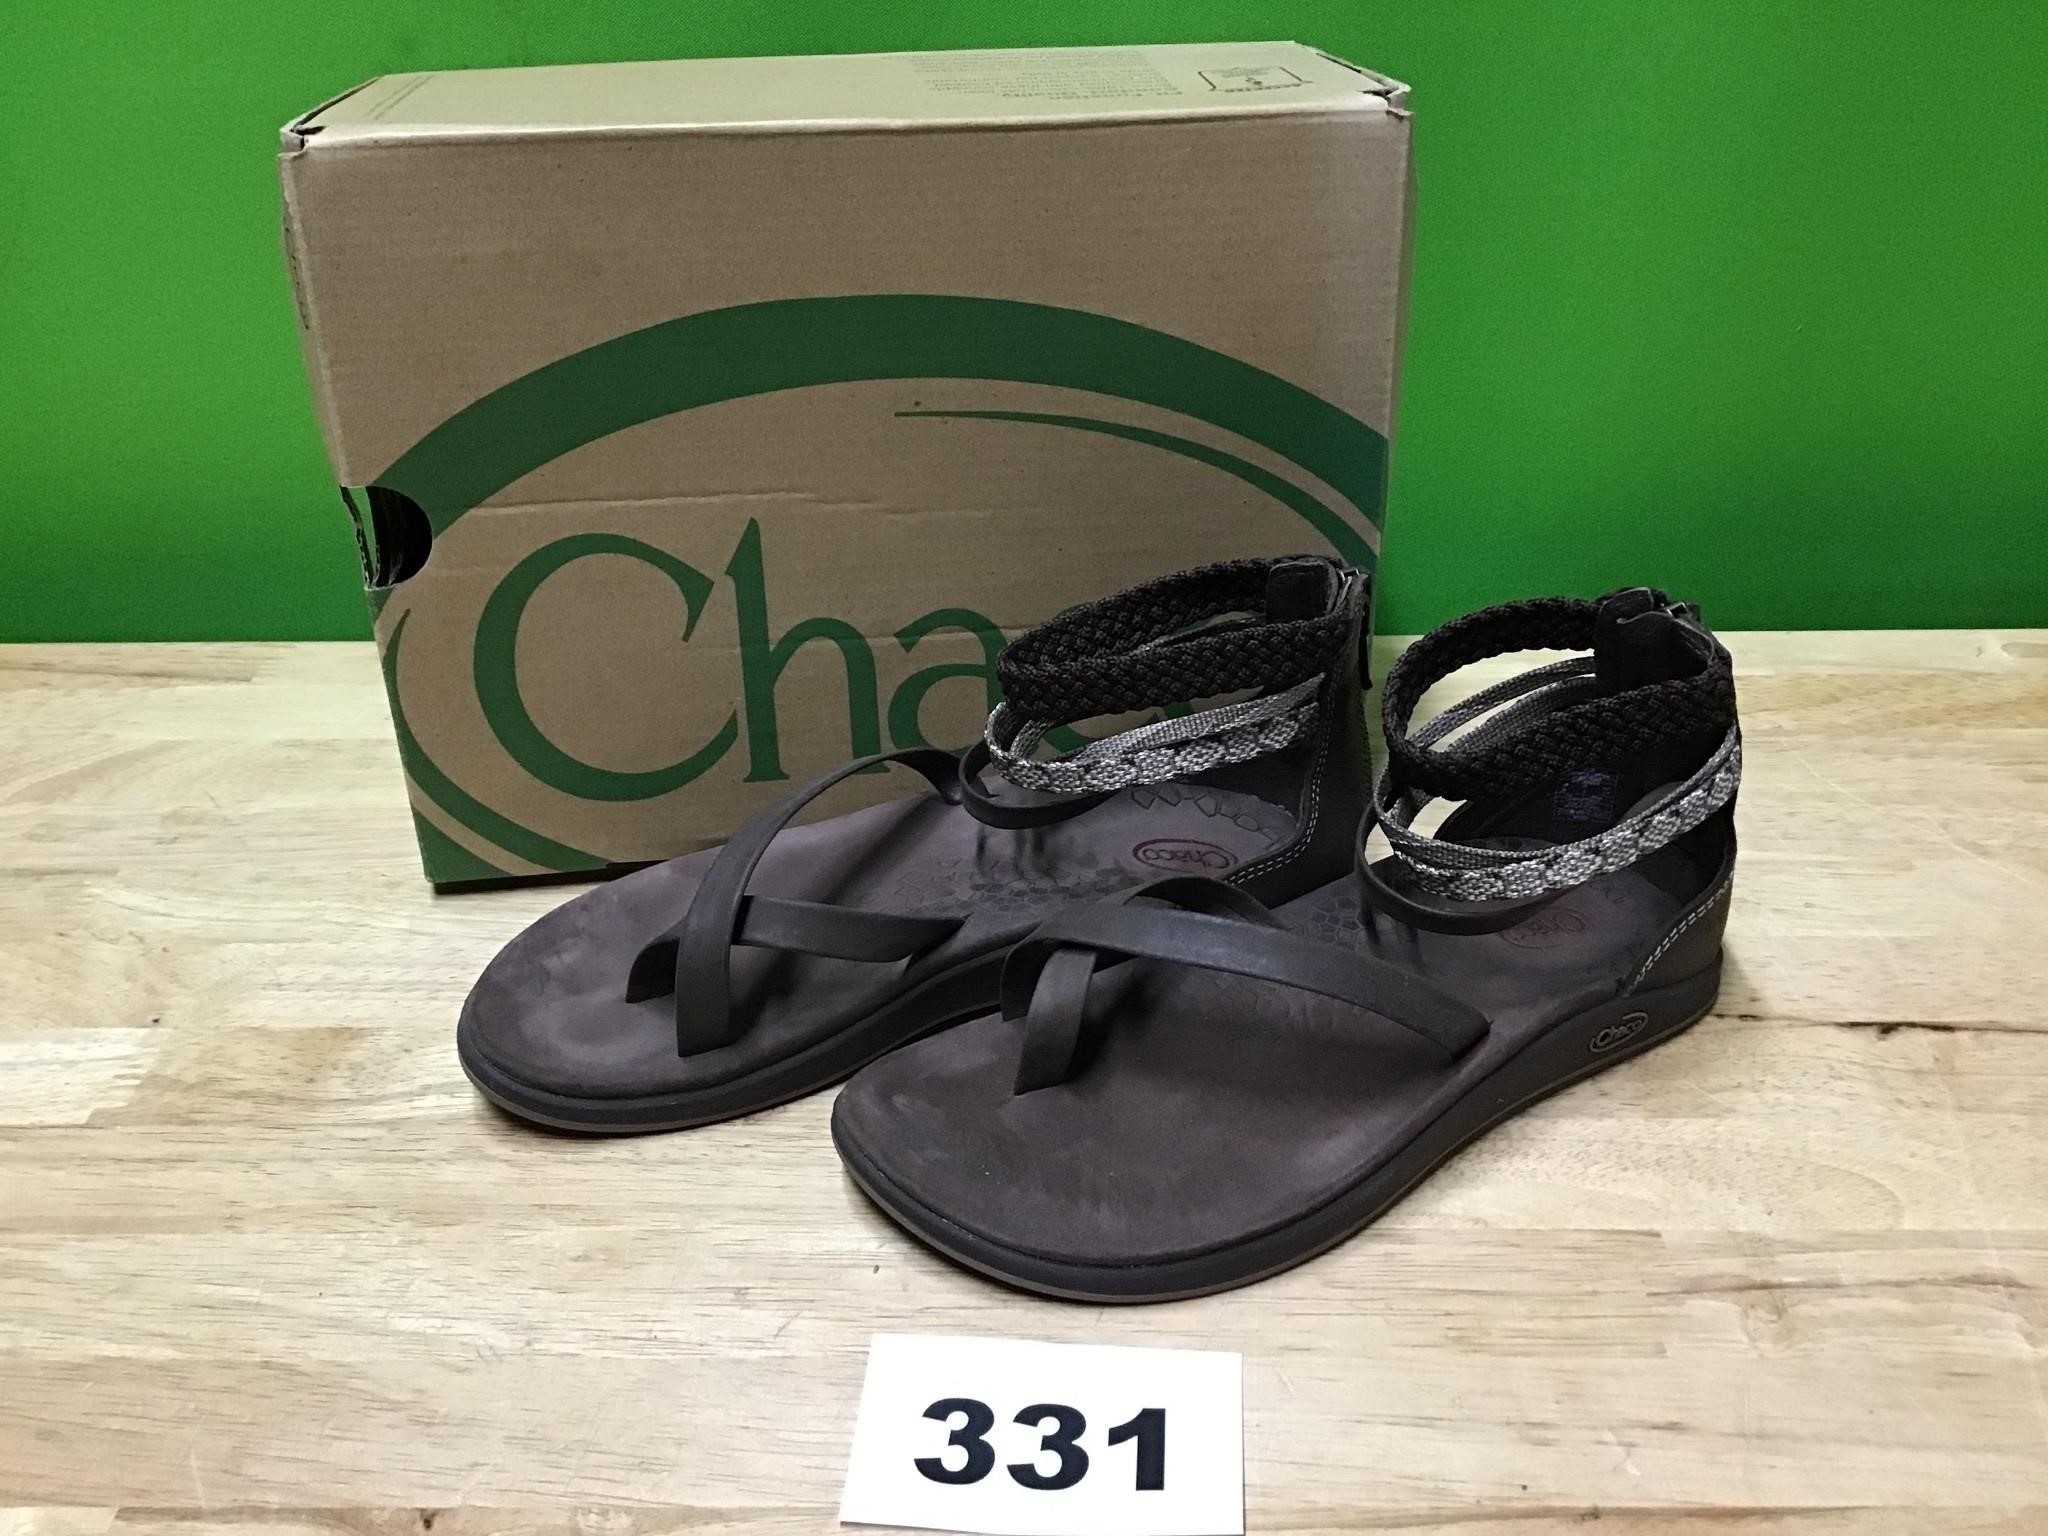 Women’s Chaco Sandals size 6